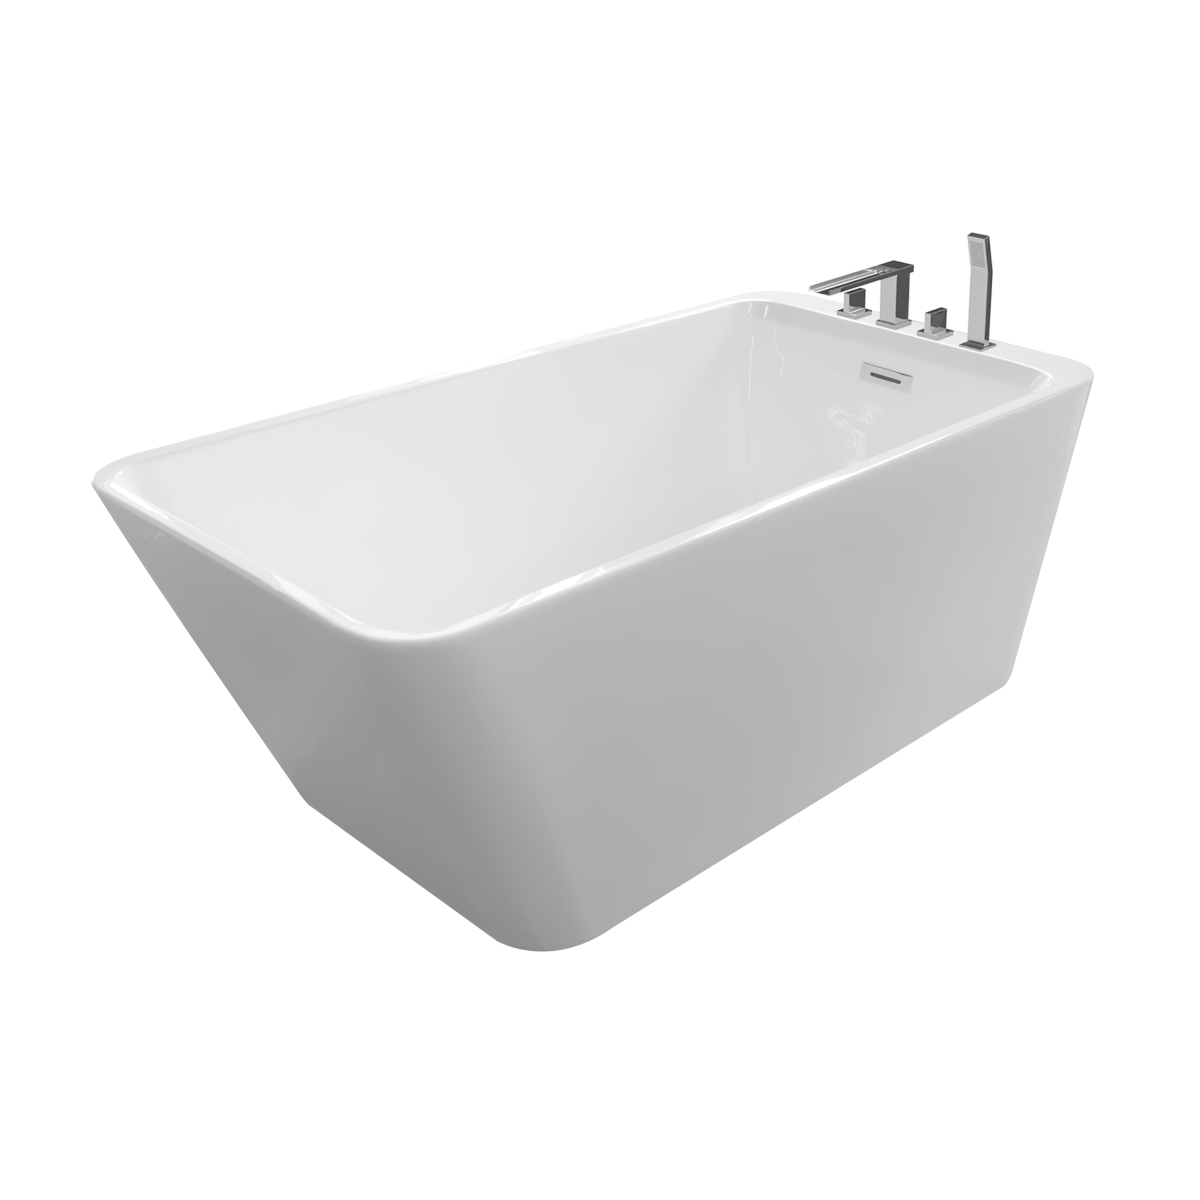 Justinian 67 Contemporary Rectangular Freestanding Acrylic Insulated Bath Tub With Faucet Deck, White - 67 X 29 X 23 In.